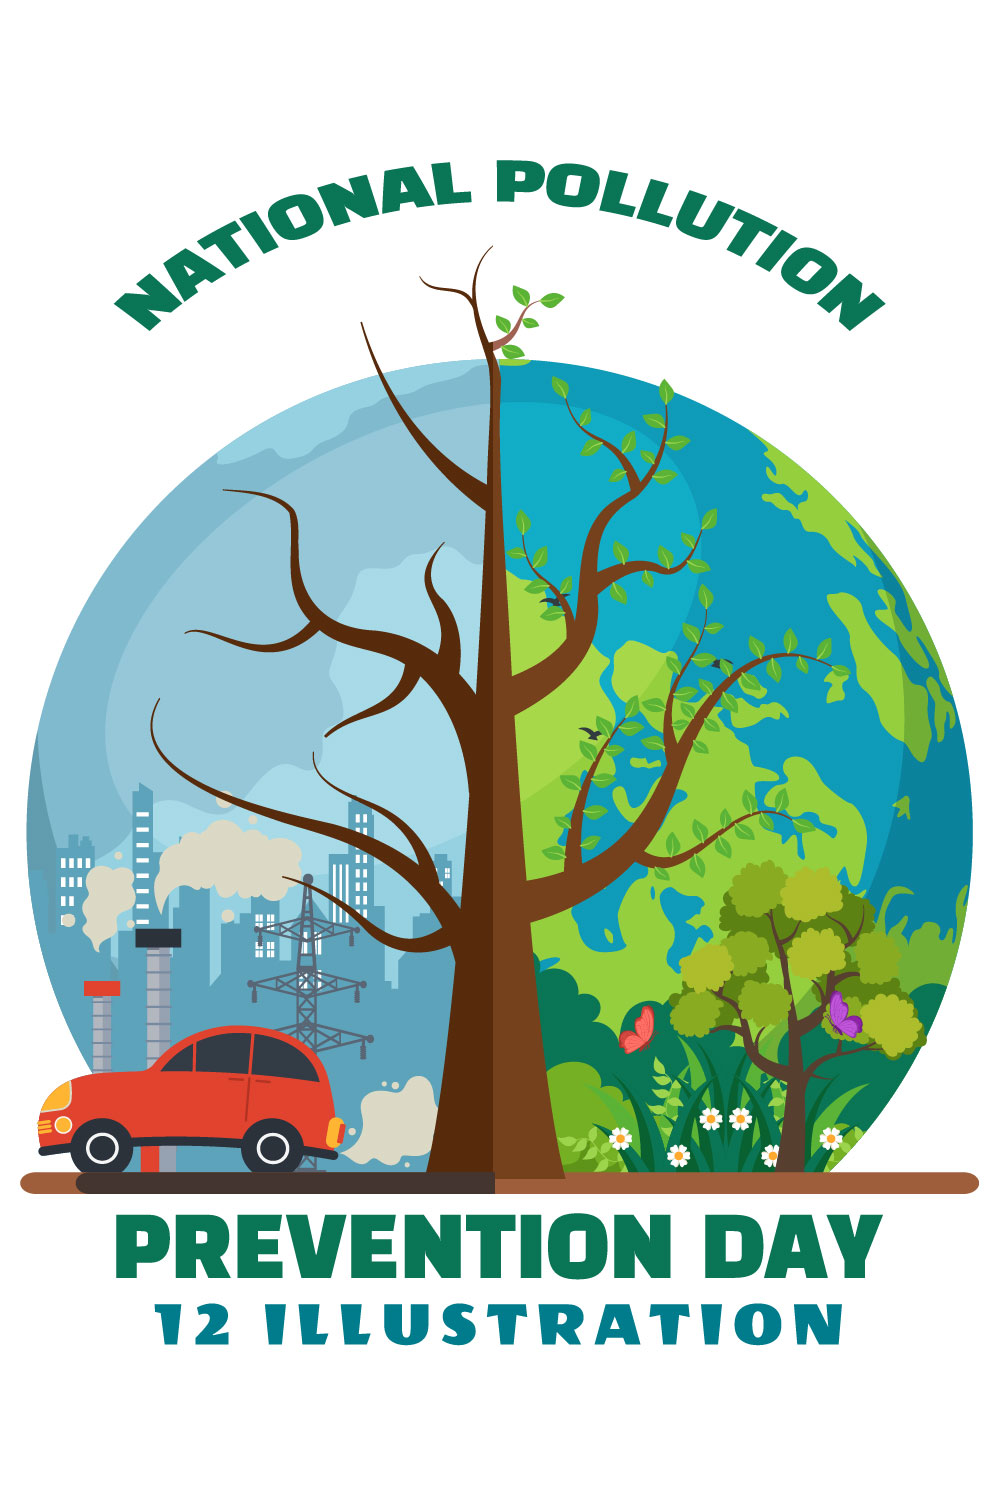 National Pollution Control Day Poster Design Stock Illustration 2055135827  | Shutterstock